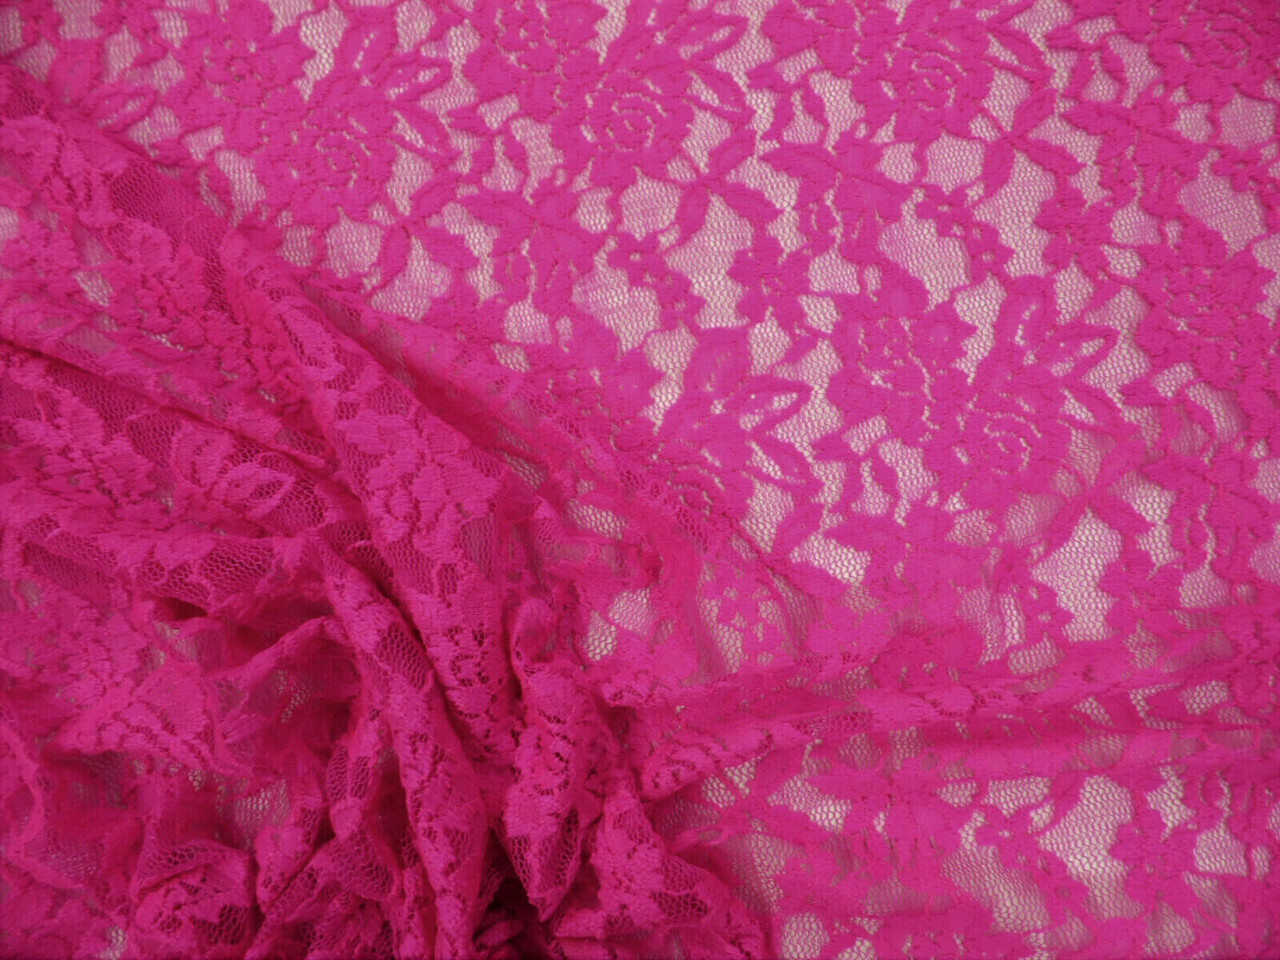 Embroidered Stretch Lace Apparel Fabric Sheer Floral Hot Pink TT102